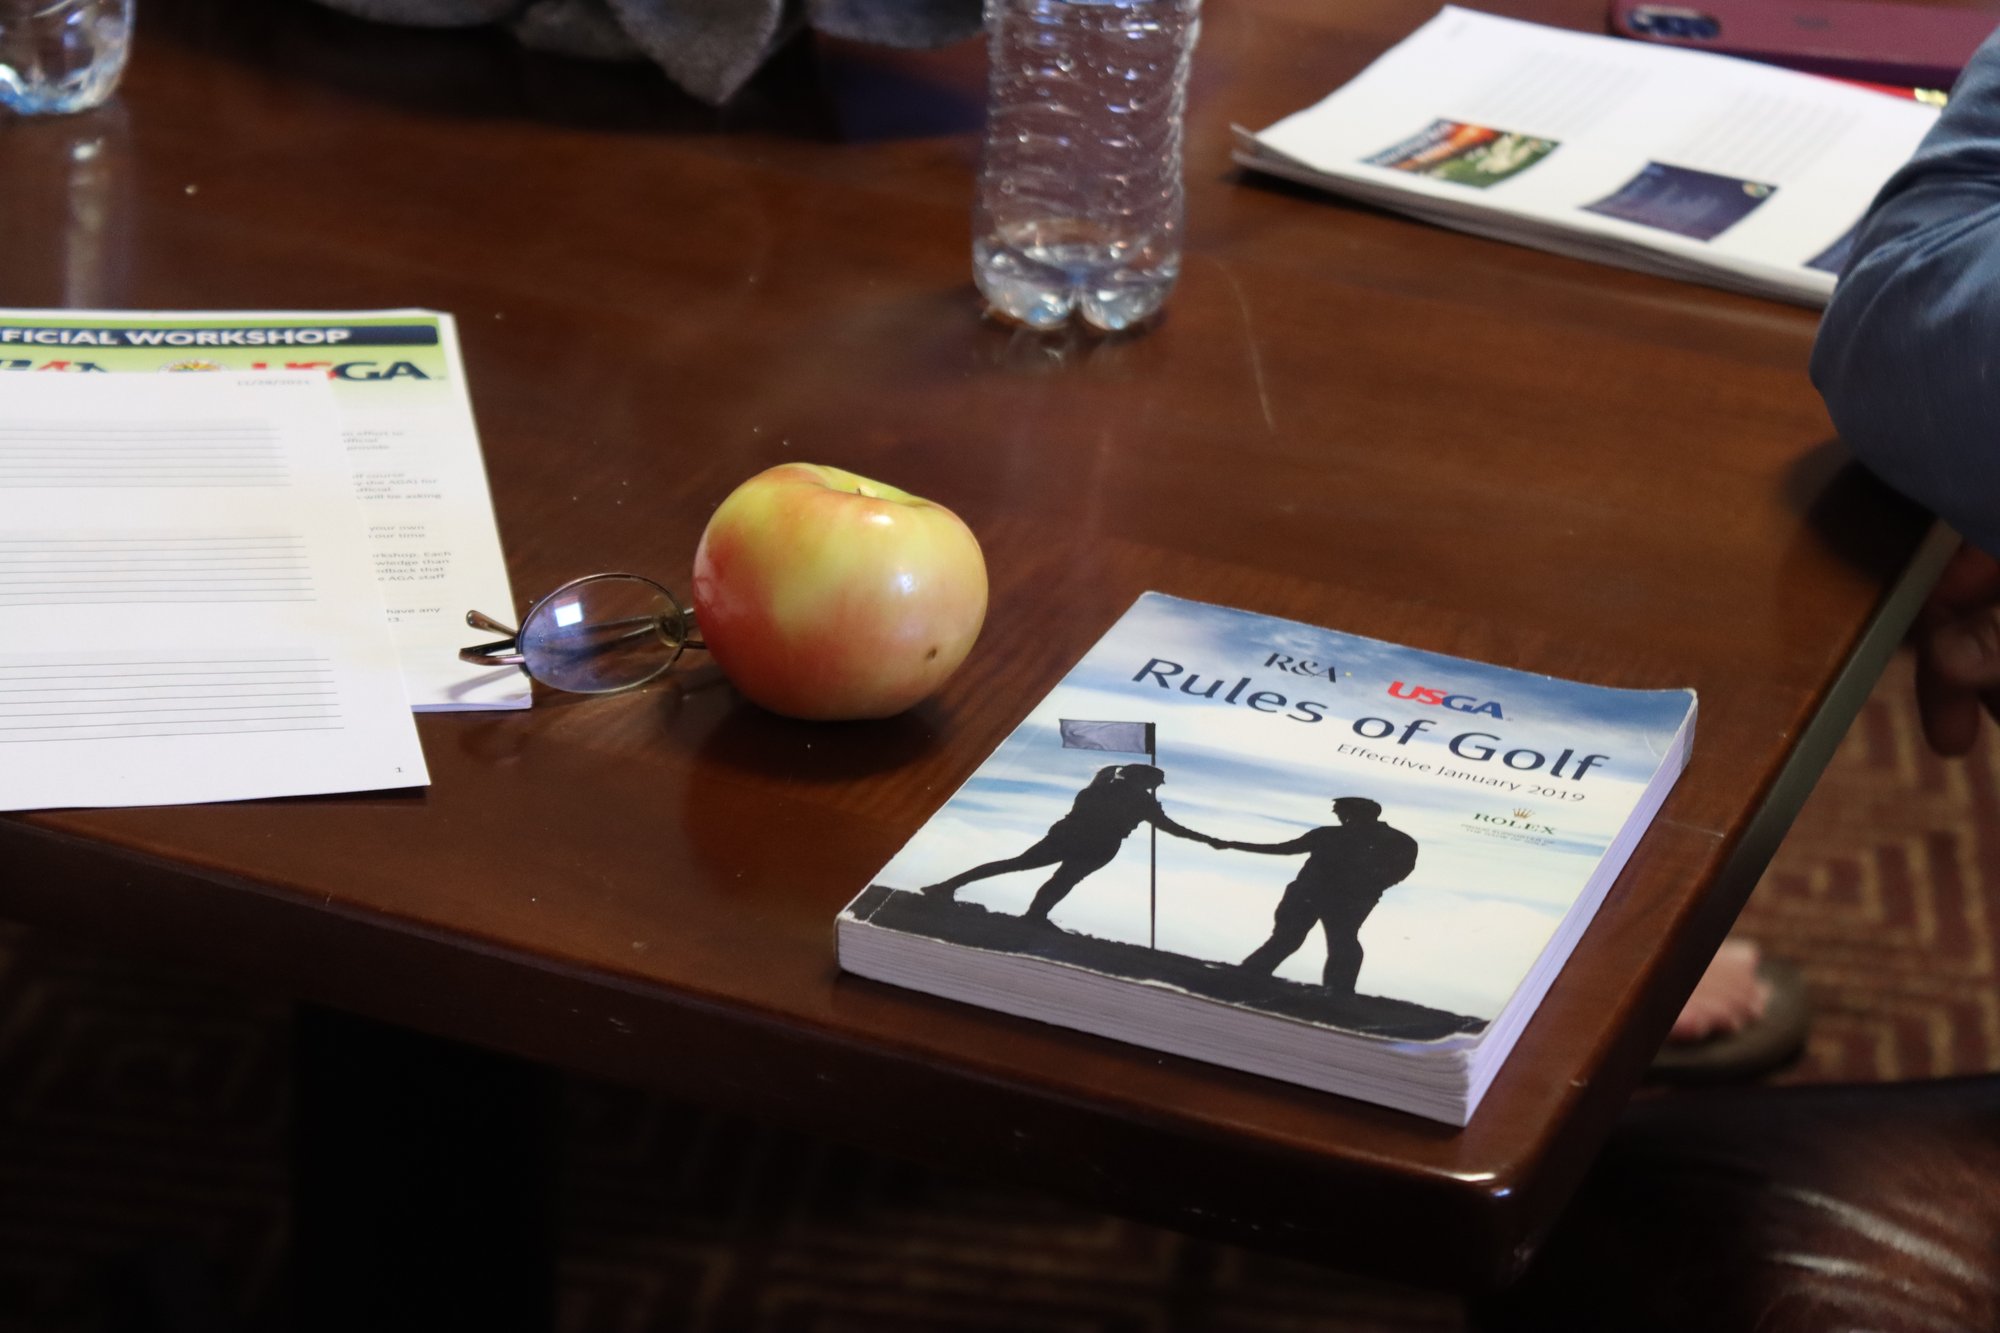 Rules of Golf Book on Table